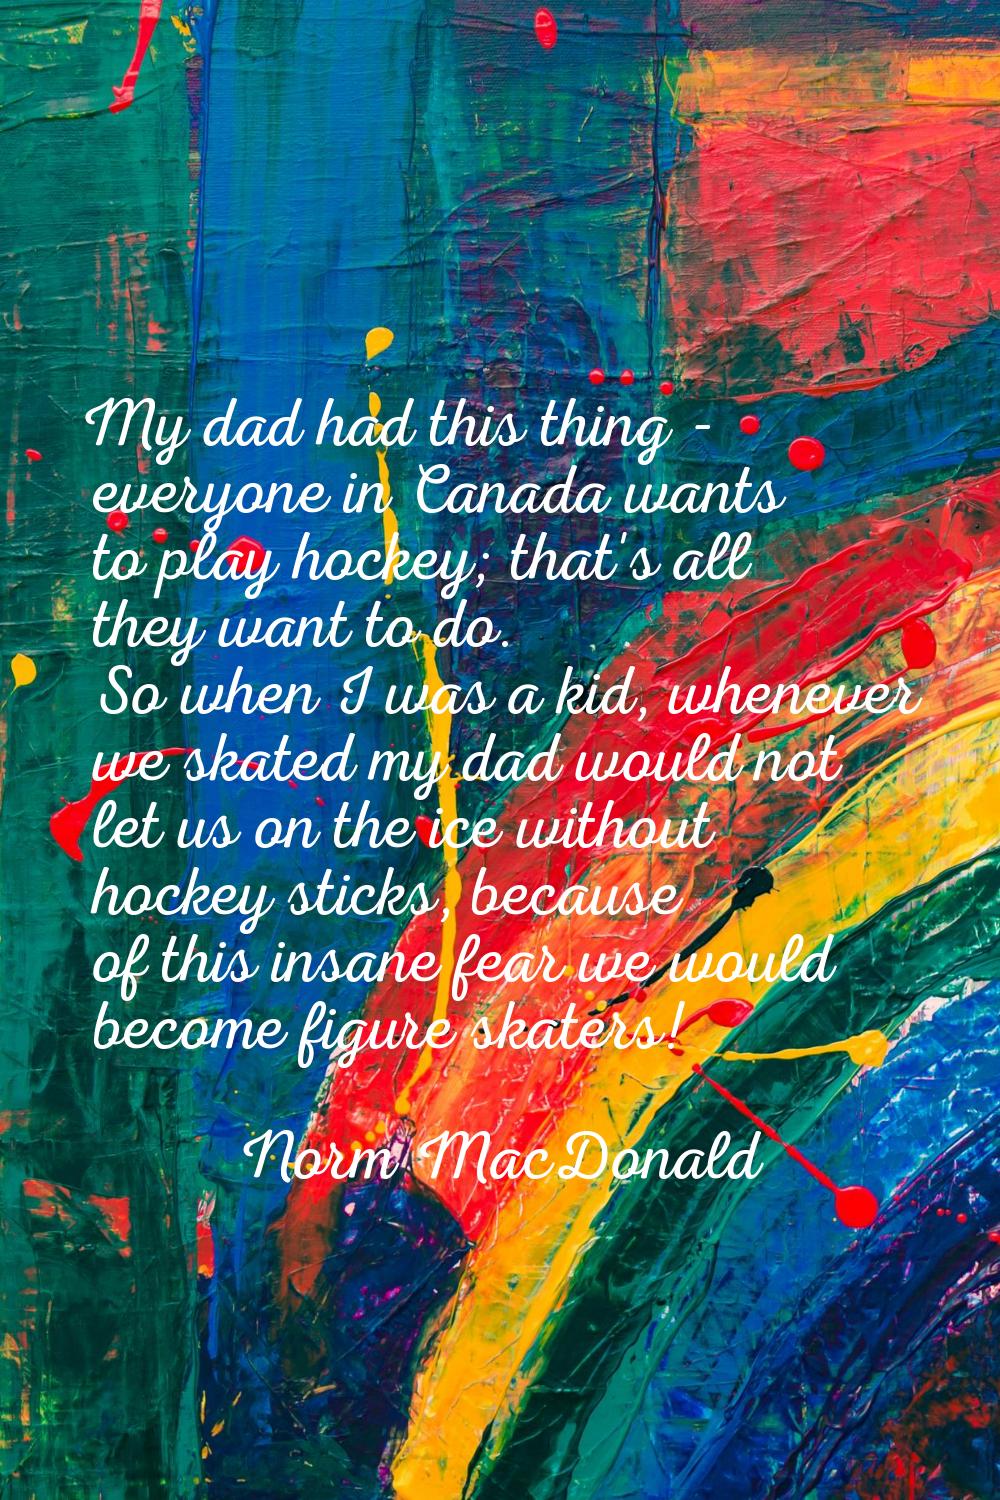 My dad had this thing - everyone in Canada wants to play hockey; that's all they want to do. So whe